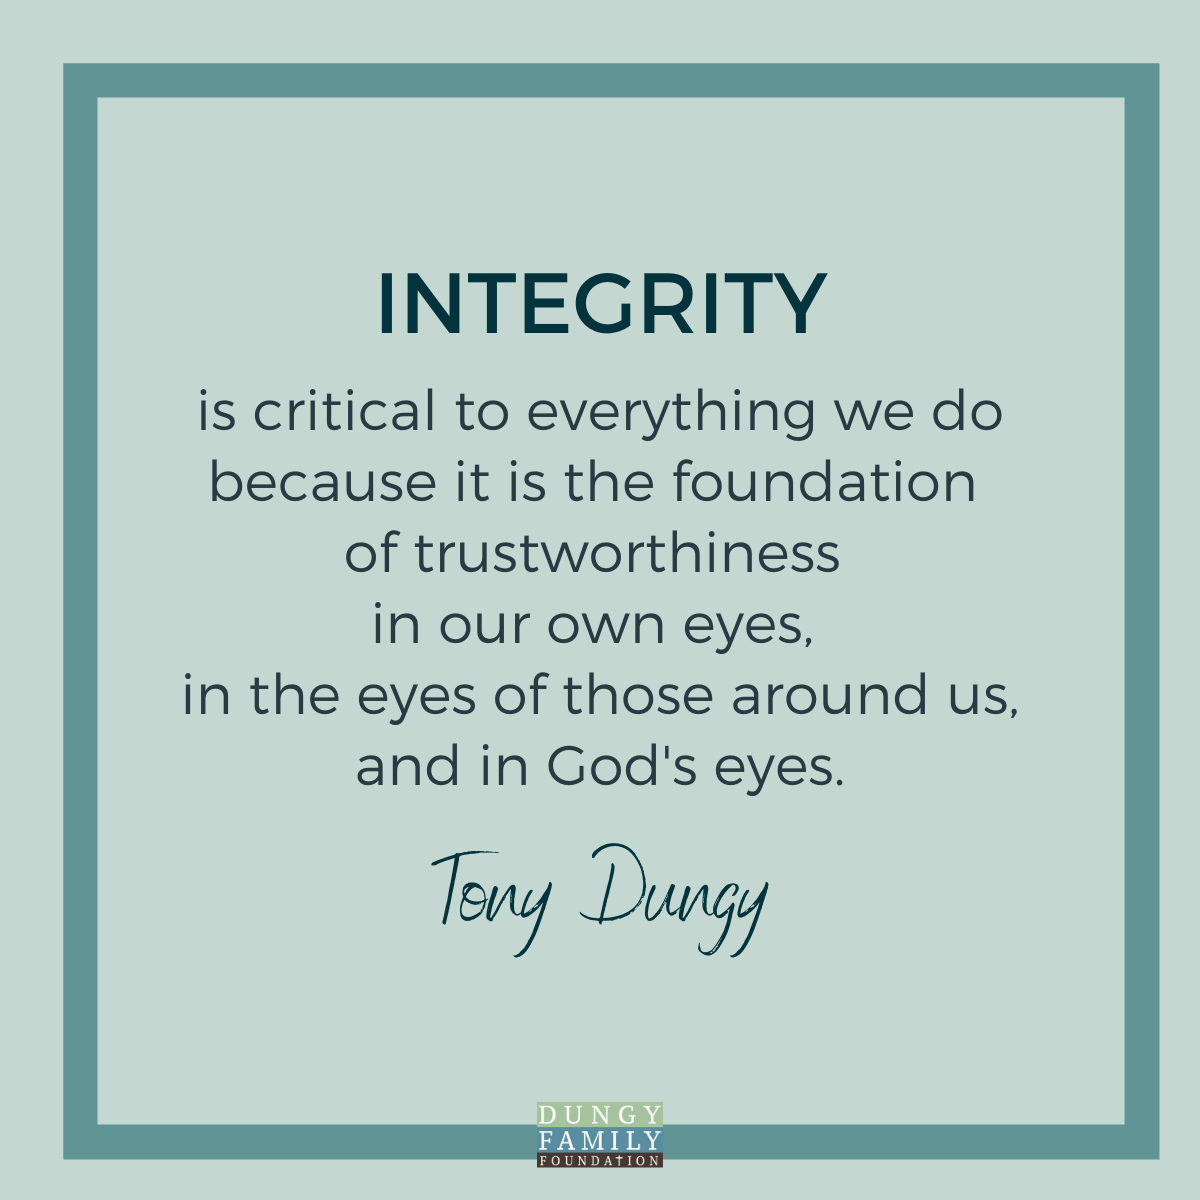 Integrity is critical to everything we do